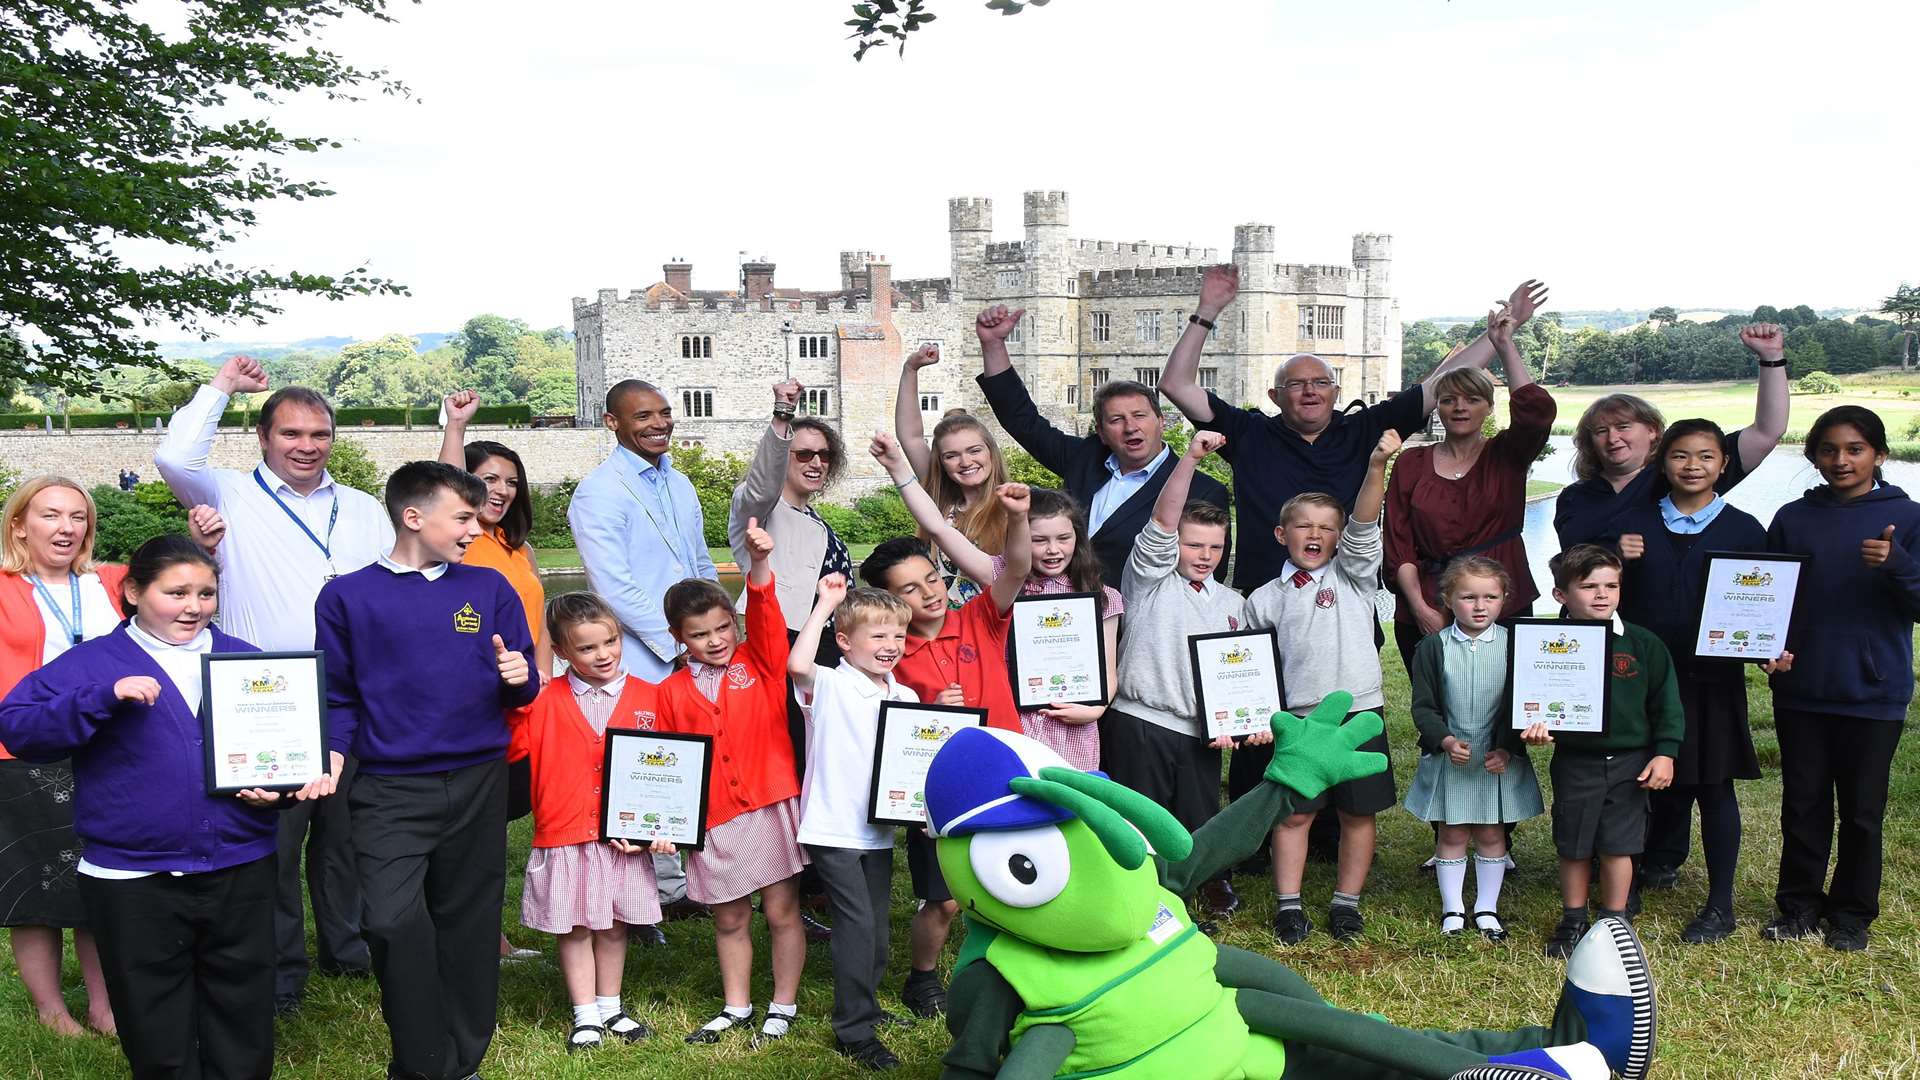 KM Walk to School champions and key partners celebrate success at the Summer Challenge Day event staged at Leeds Castle